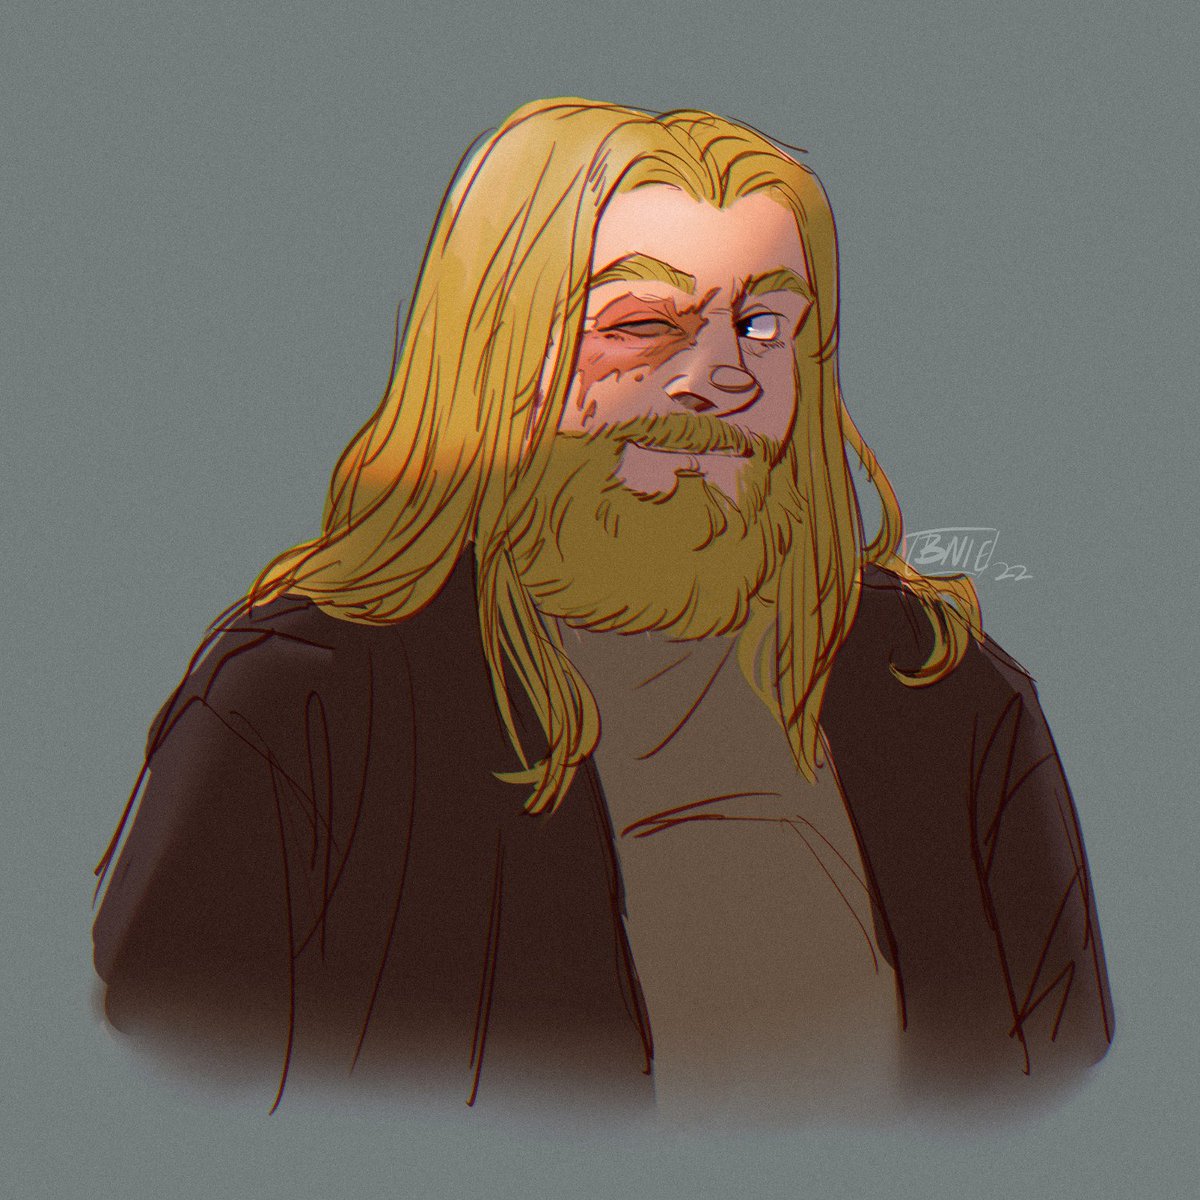 RT @thwipped: lighting doodles ft. thor my beloved and me i guess https://t.co/atxTu658lH